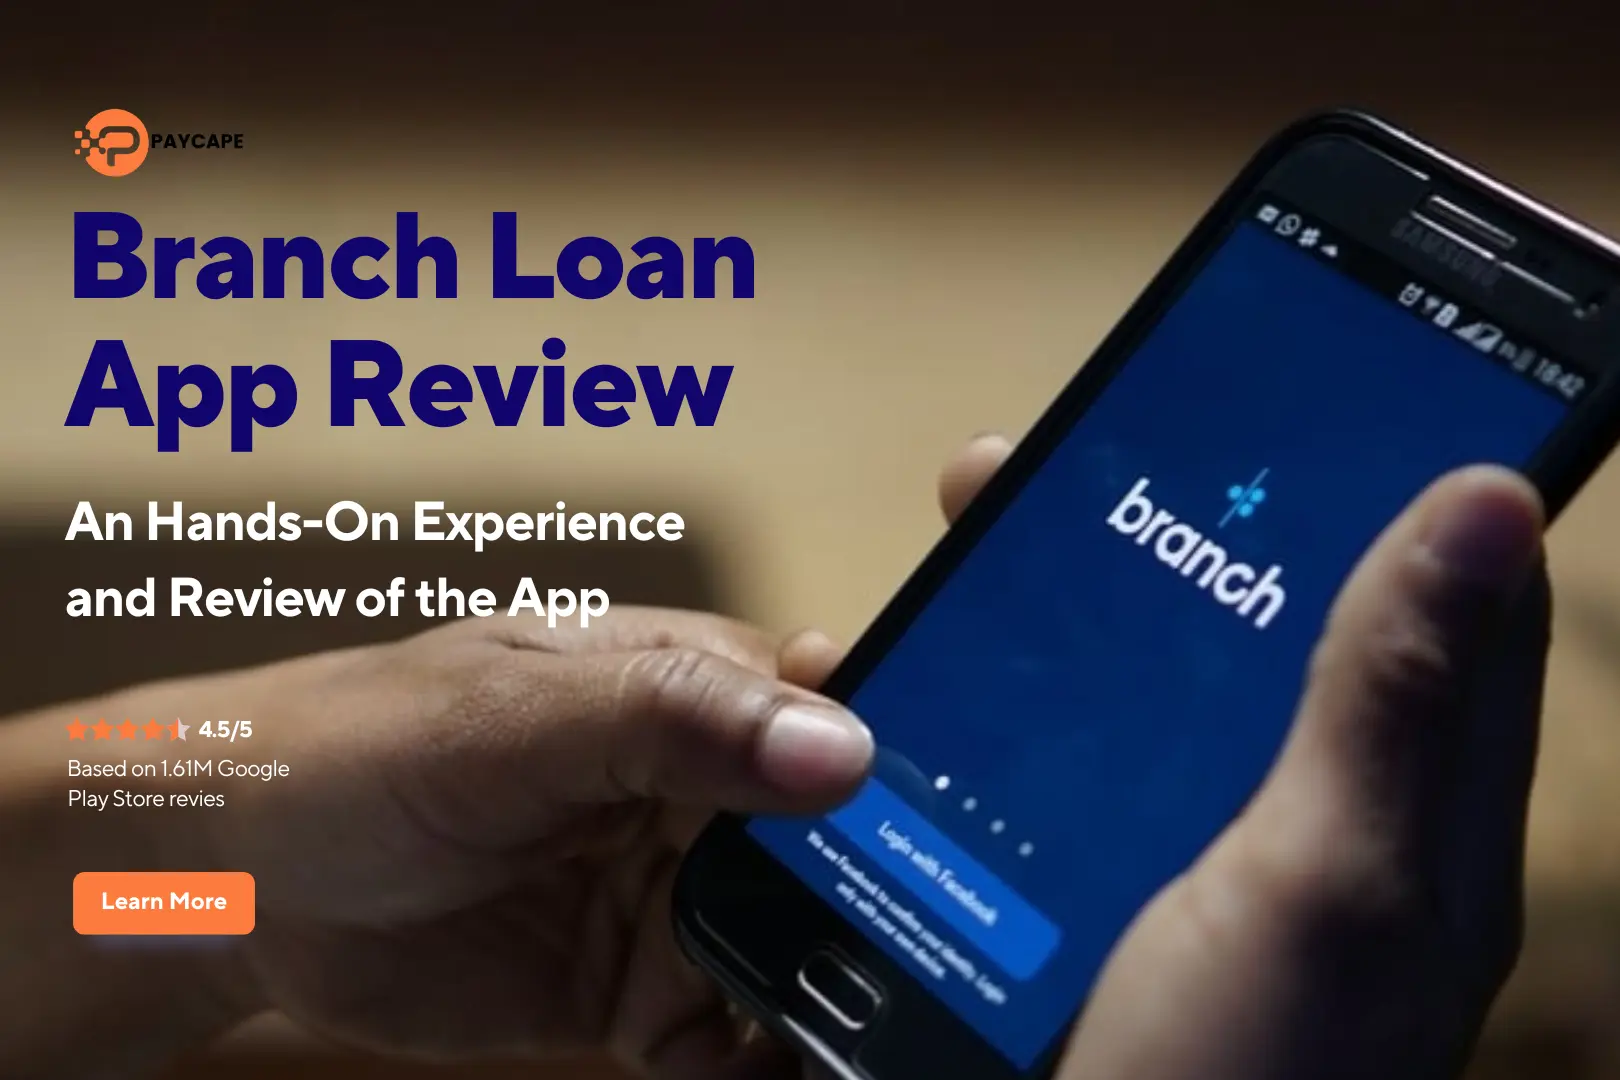 Branch Loan App: An Hands-On Experience and Review of the App